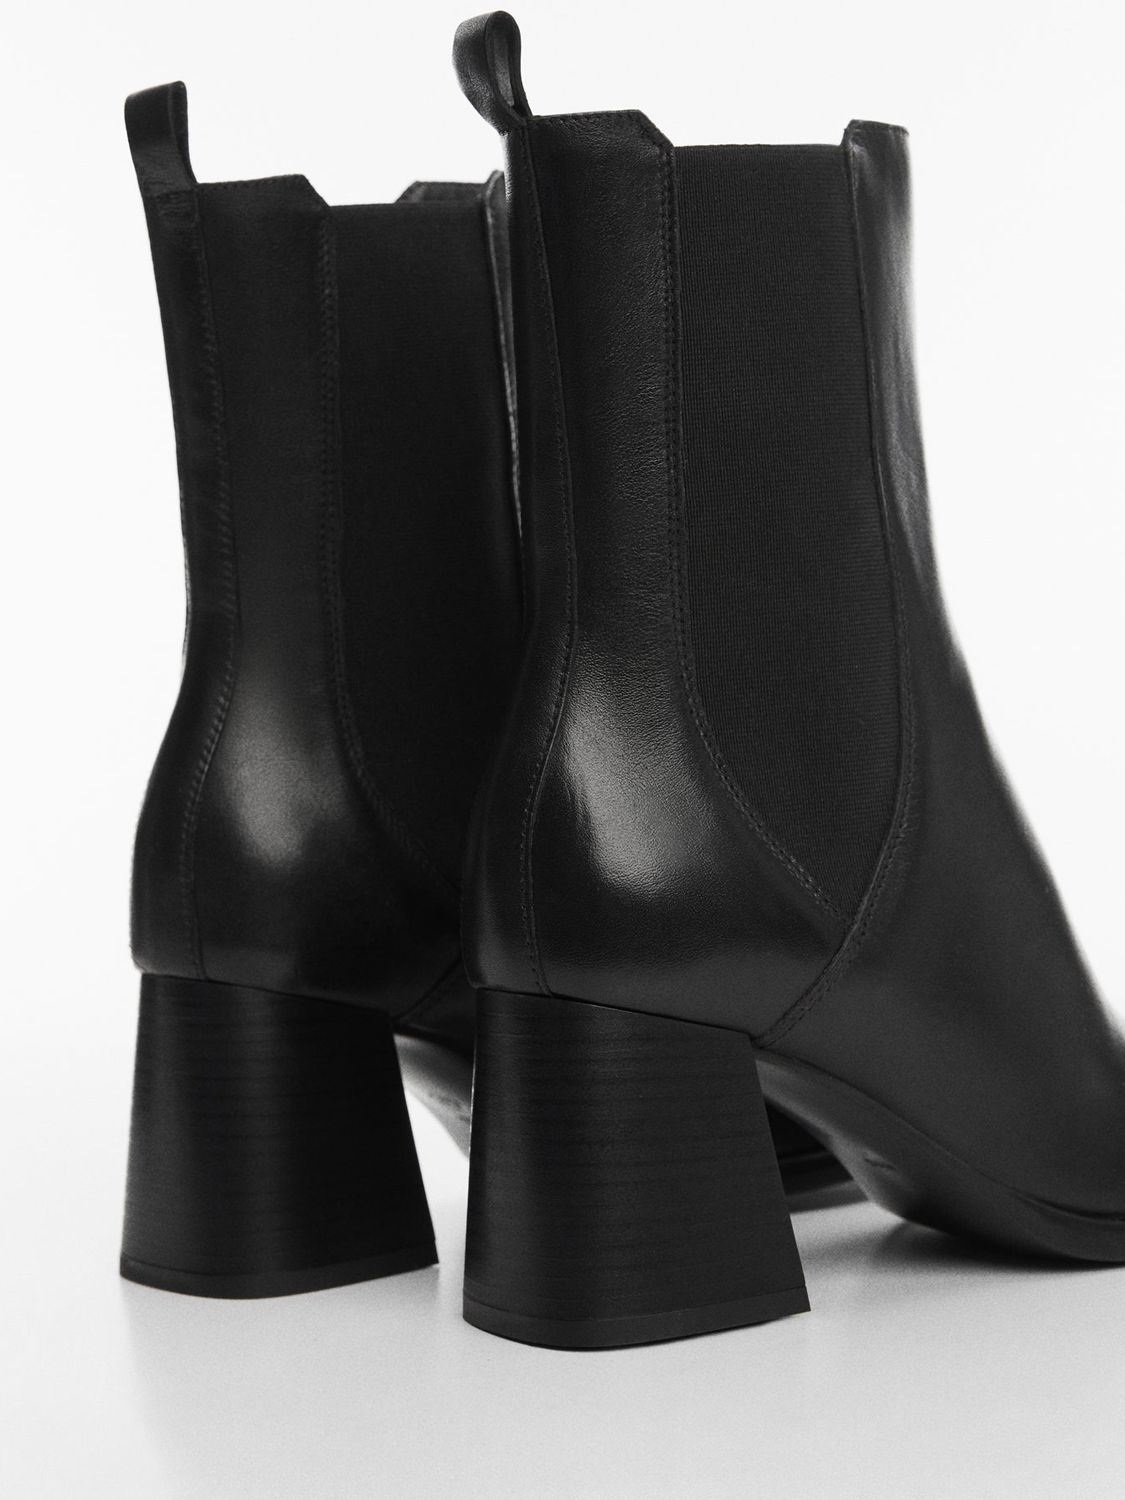 Mango Bandy Leather Blend Ankle Boots, Black at John Lewis & Partners